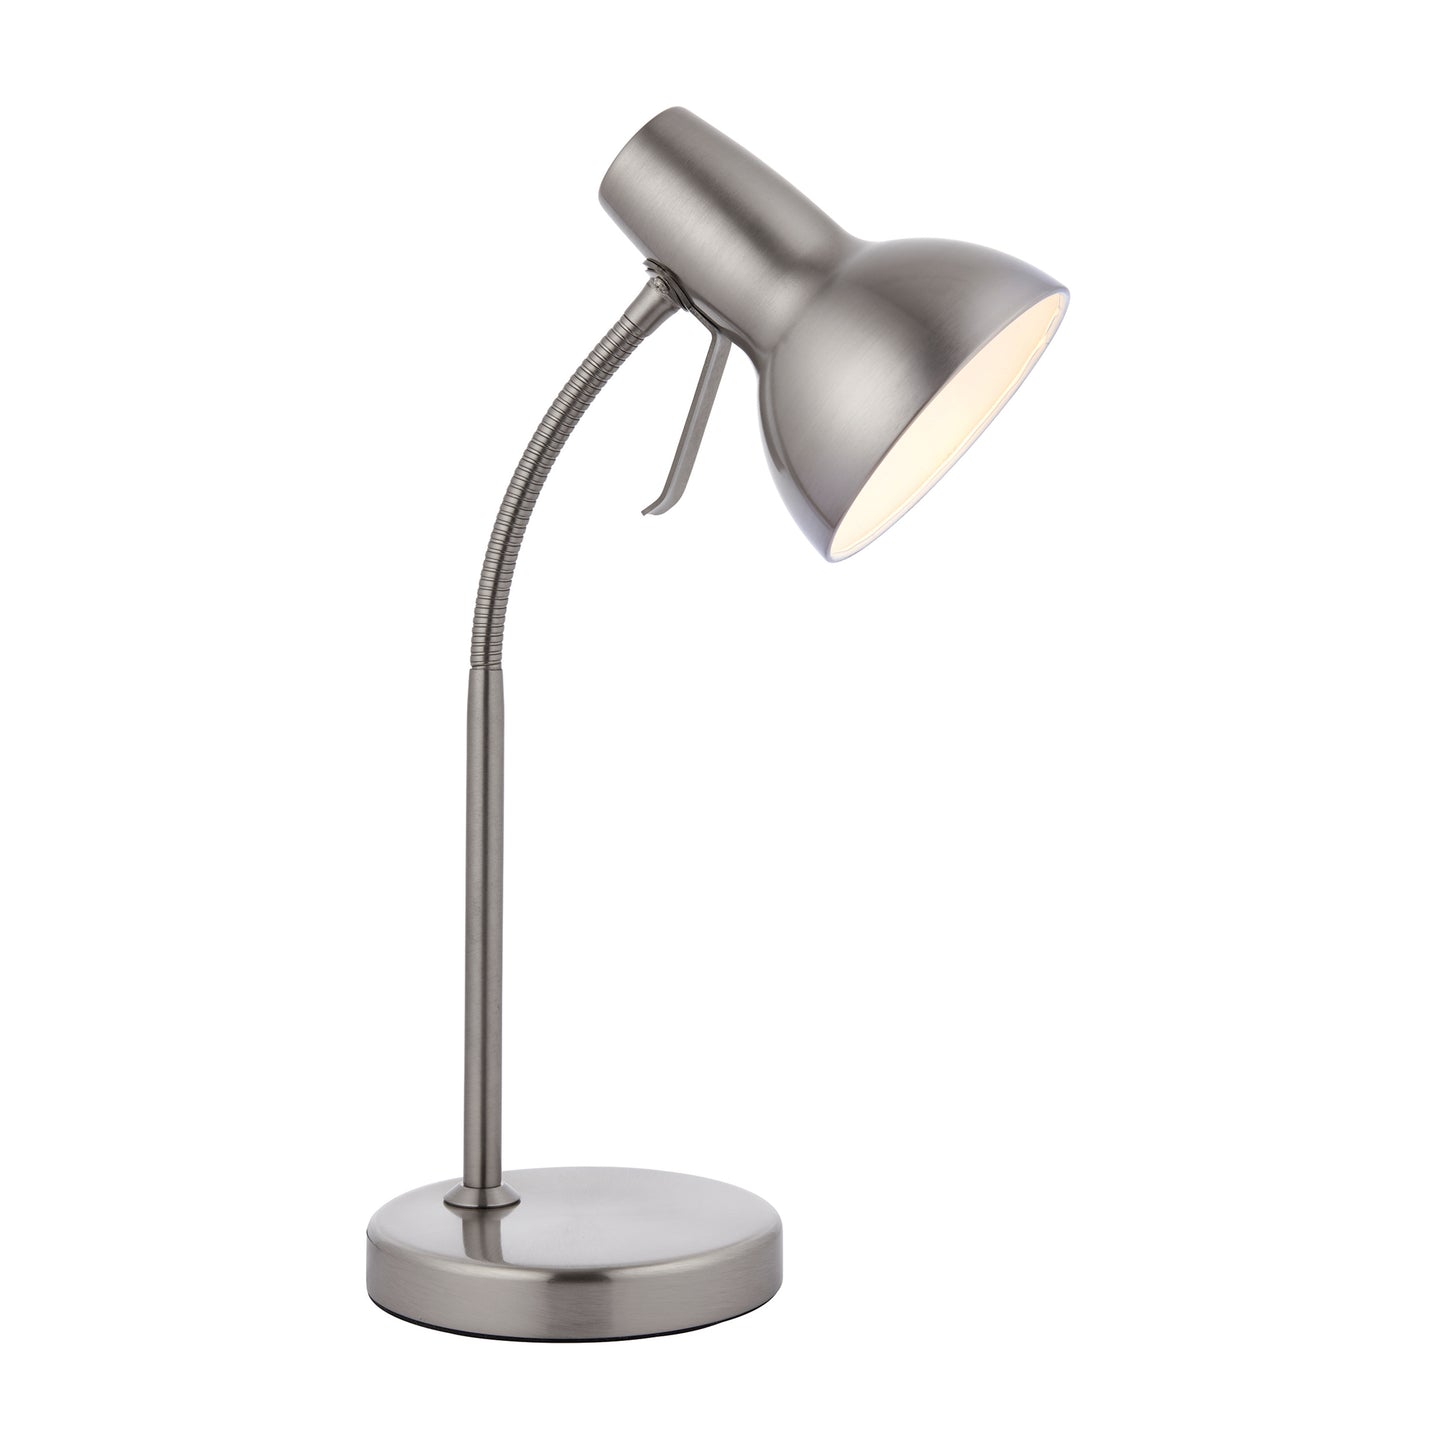 A Bickerton USB Table Lamp Nickel for interior decor from Kikiathome.co.uk on a white background.